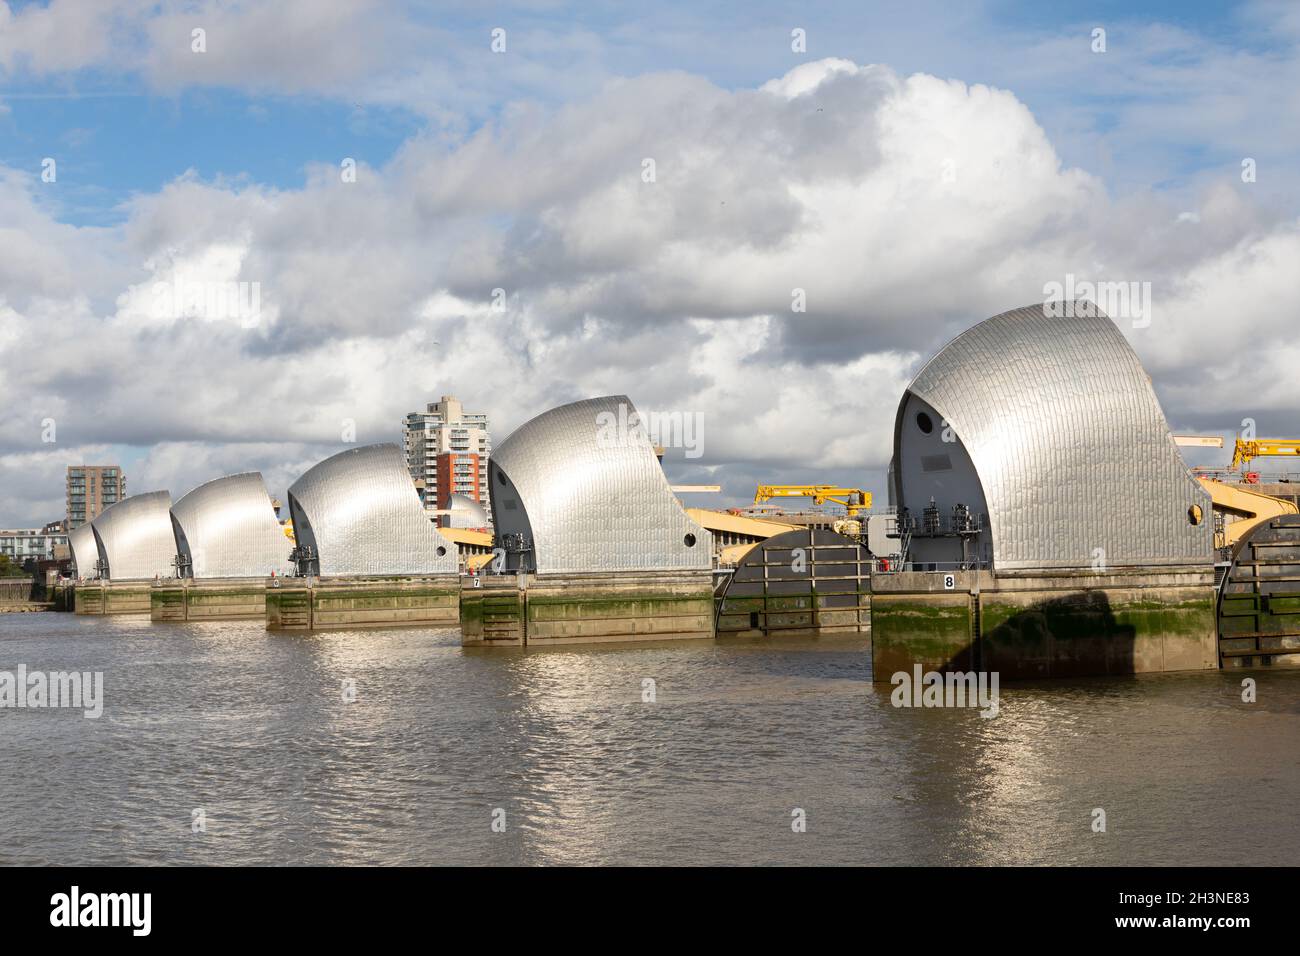 The Thames Barrier - part of London's flood defence system - designed to prevent London from being flooded by storm surges and exceptional tides. UK Stock Photo